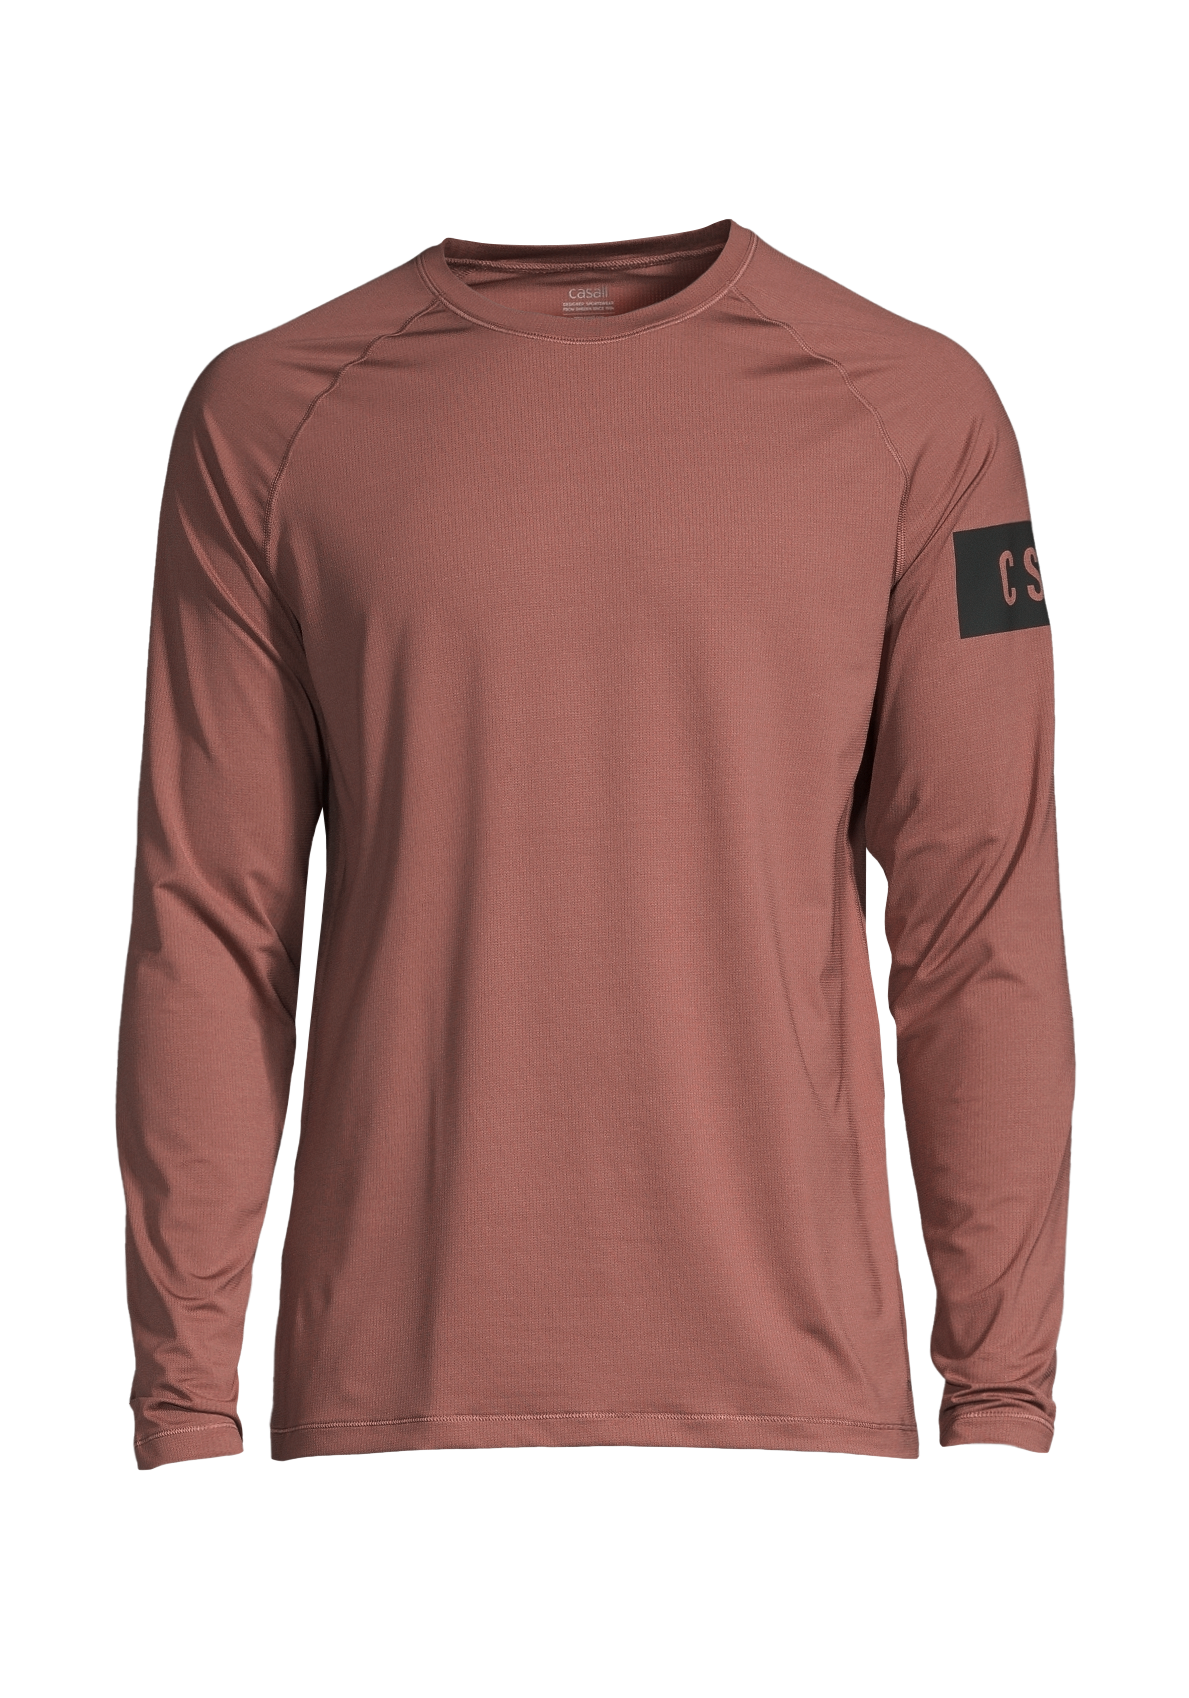 casall.com | M Rapidry Long Sleeve - Chalky Brown